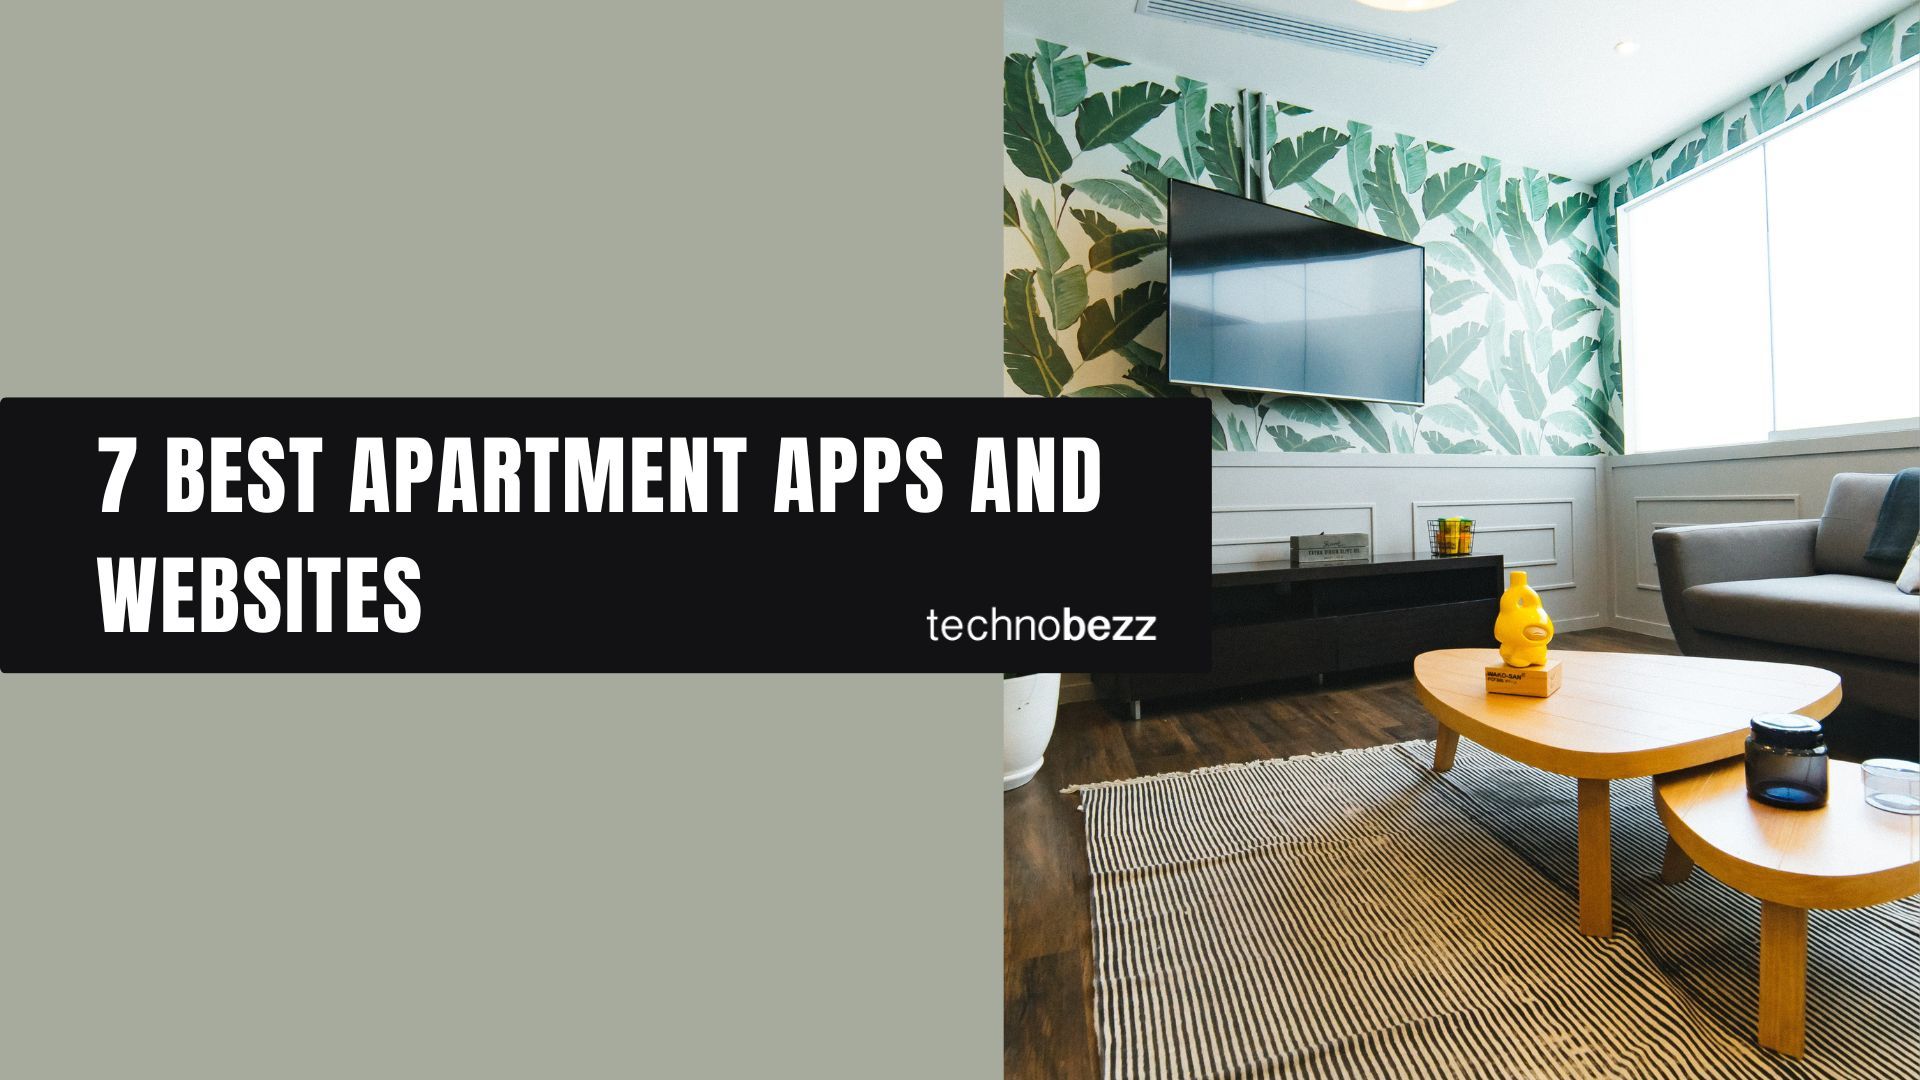 7 Best Apartment Apps And Websites